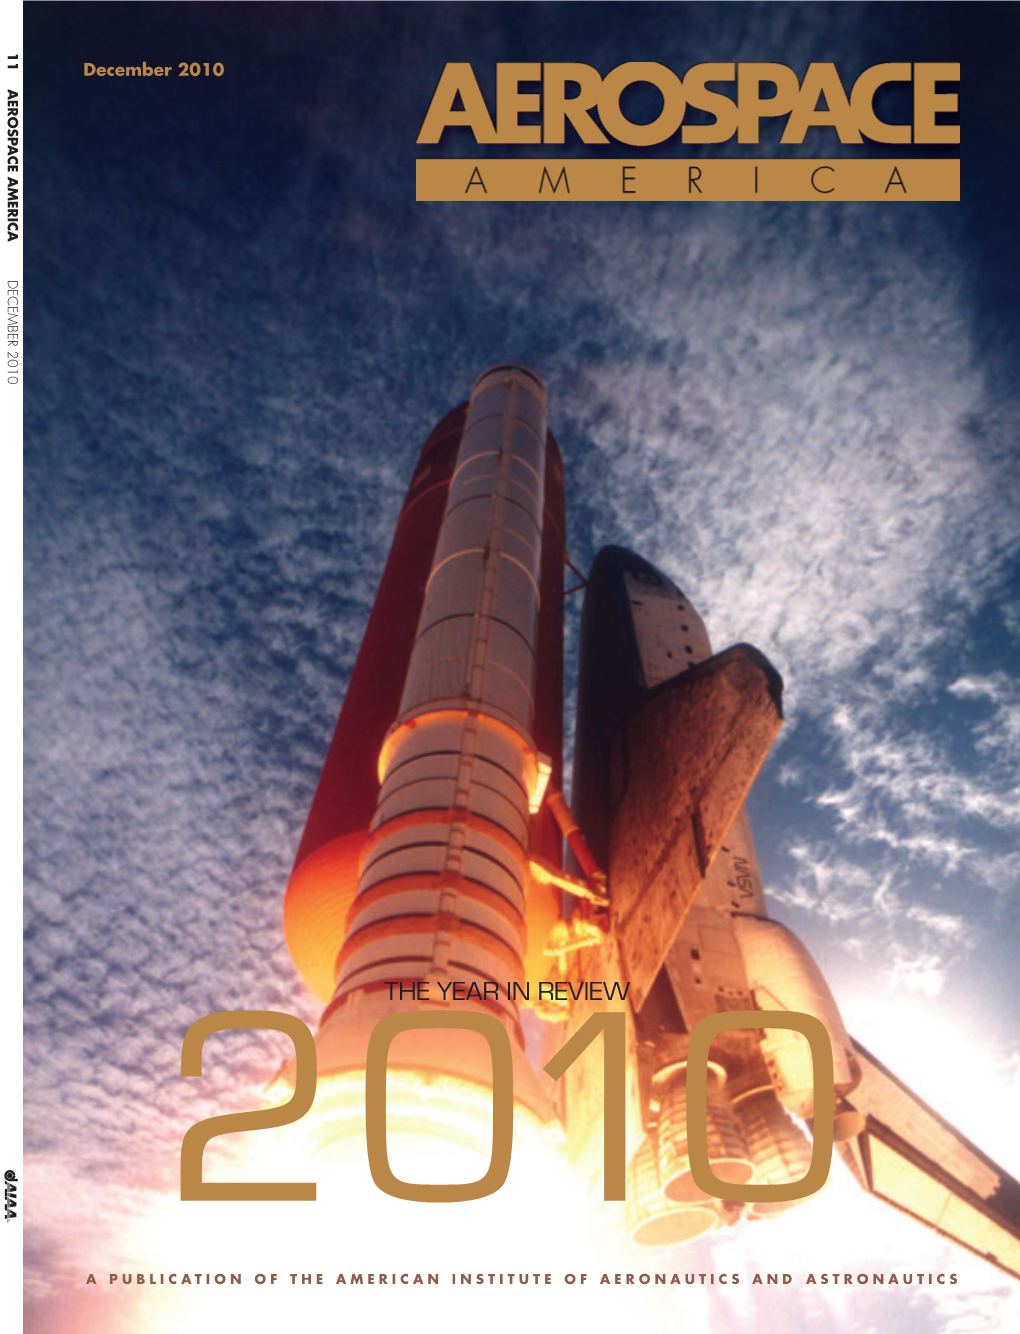 THE YEAR in REVIEW a PUBLICATION of the AMERICAN INSTITUTE of AERONAUTICS and ASTRONAUTICS Toc-December.Qxd:AA Template 11/19/10 11:42 AM Page 1